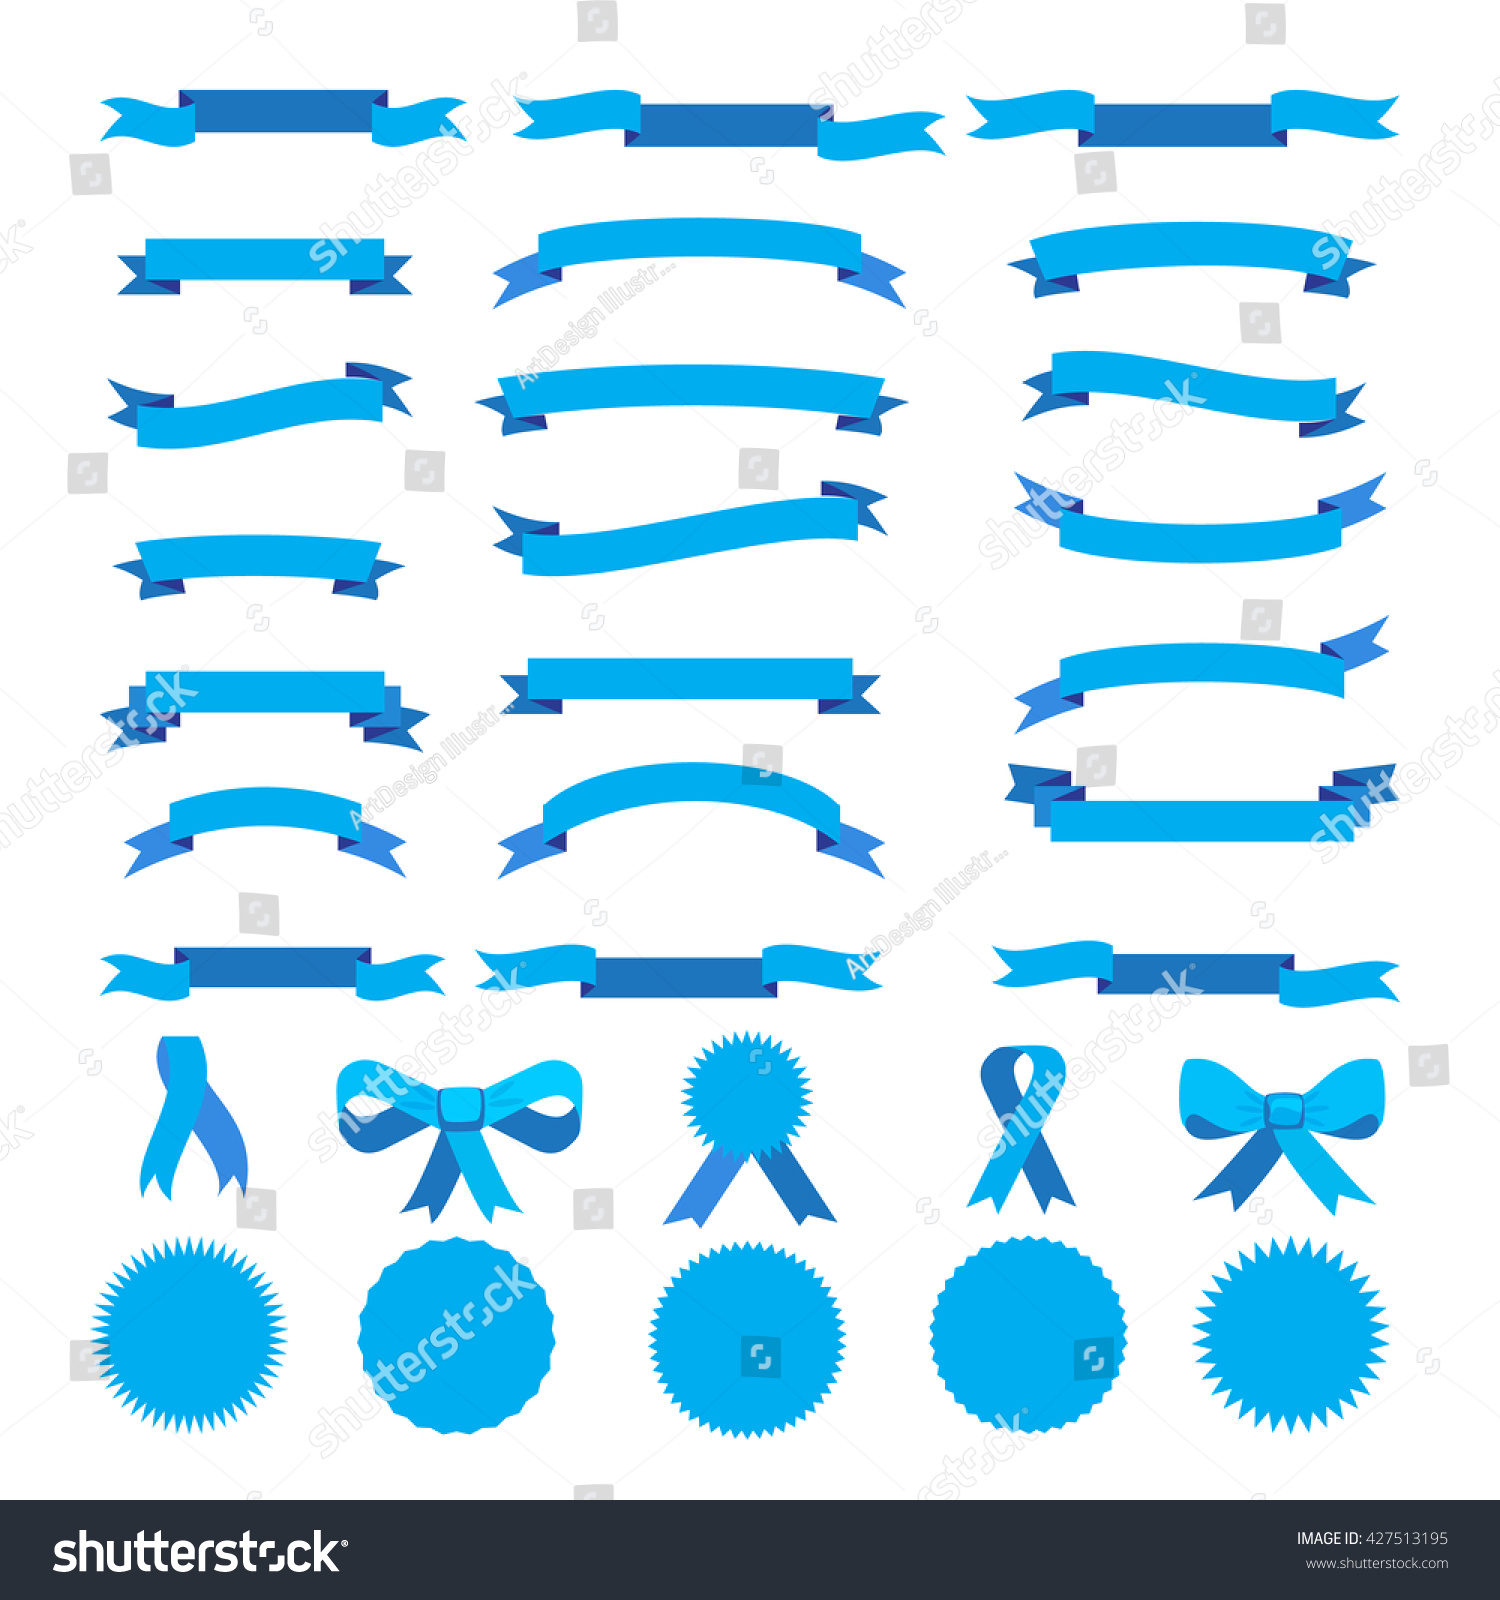 How To Tie A Tie Ribbon Images - How To Guide And Refrence